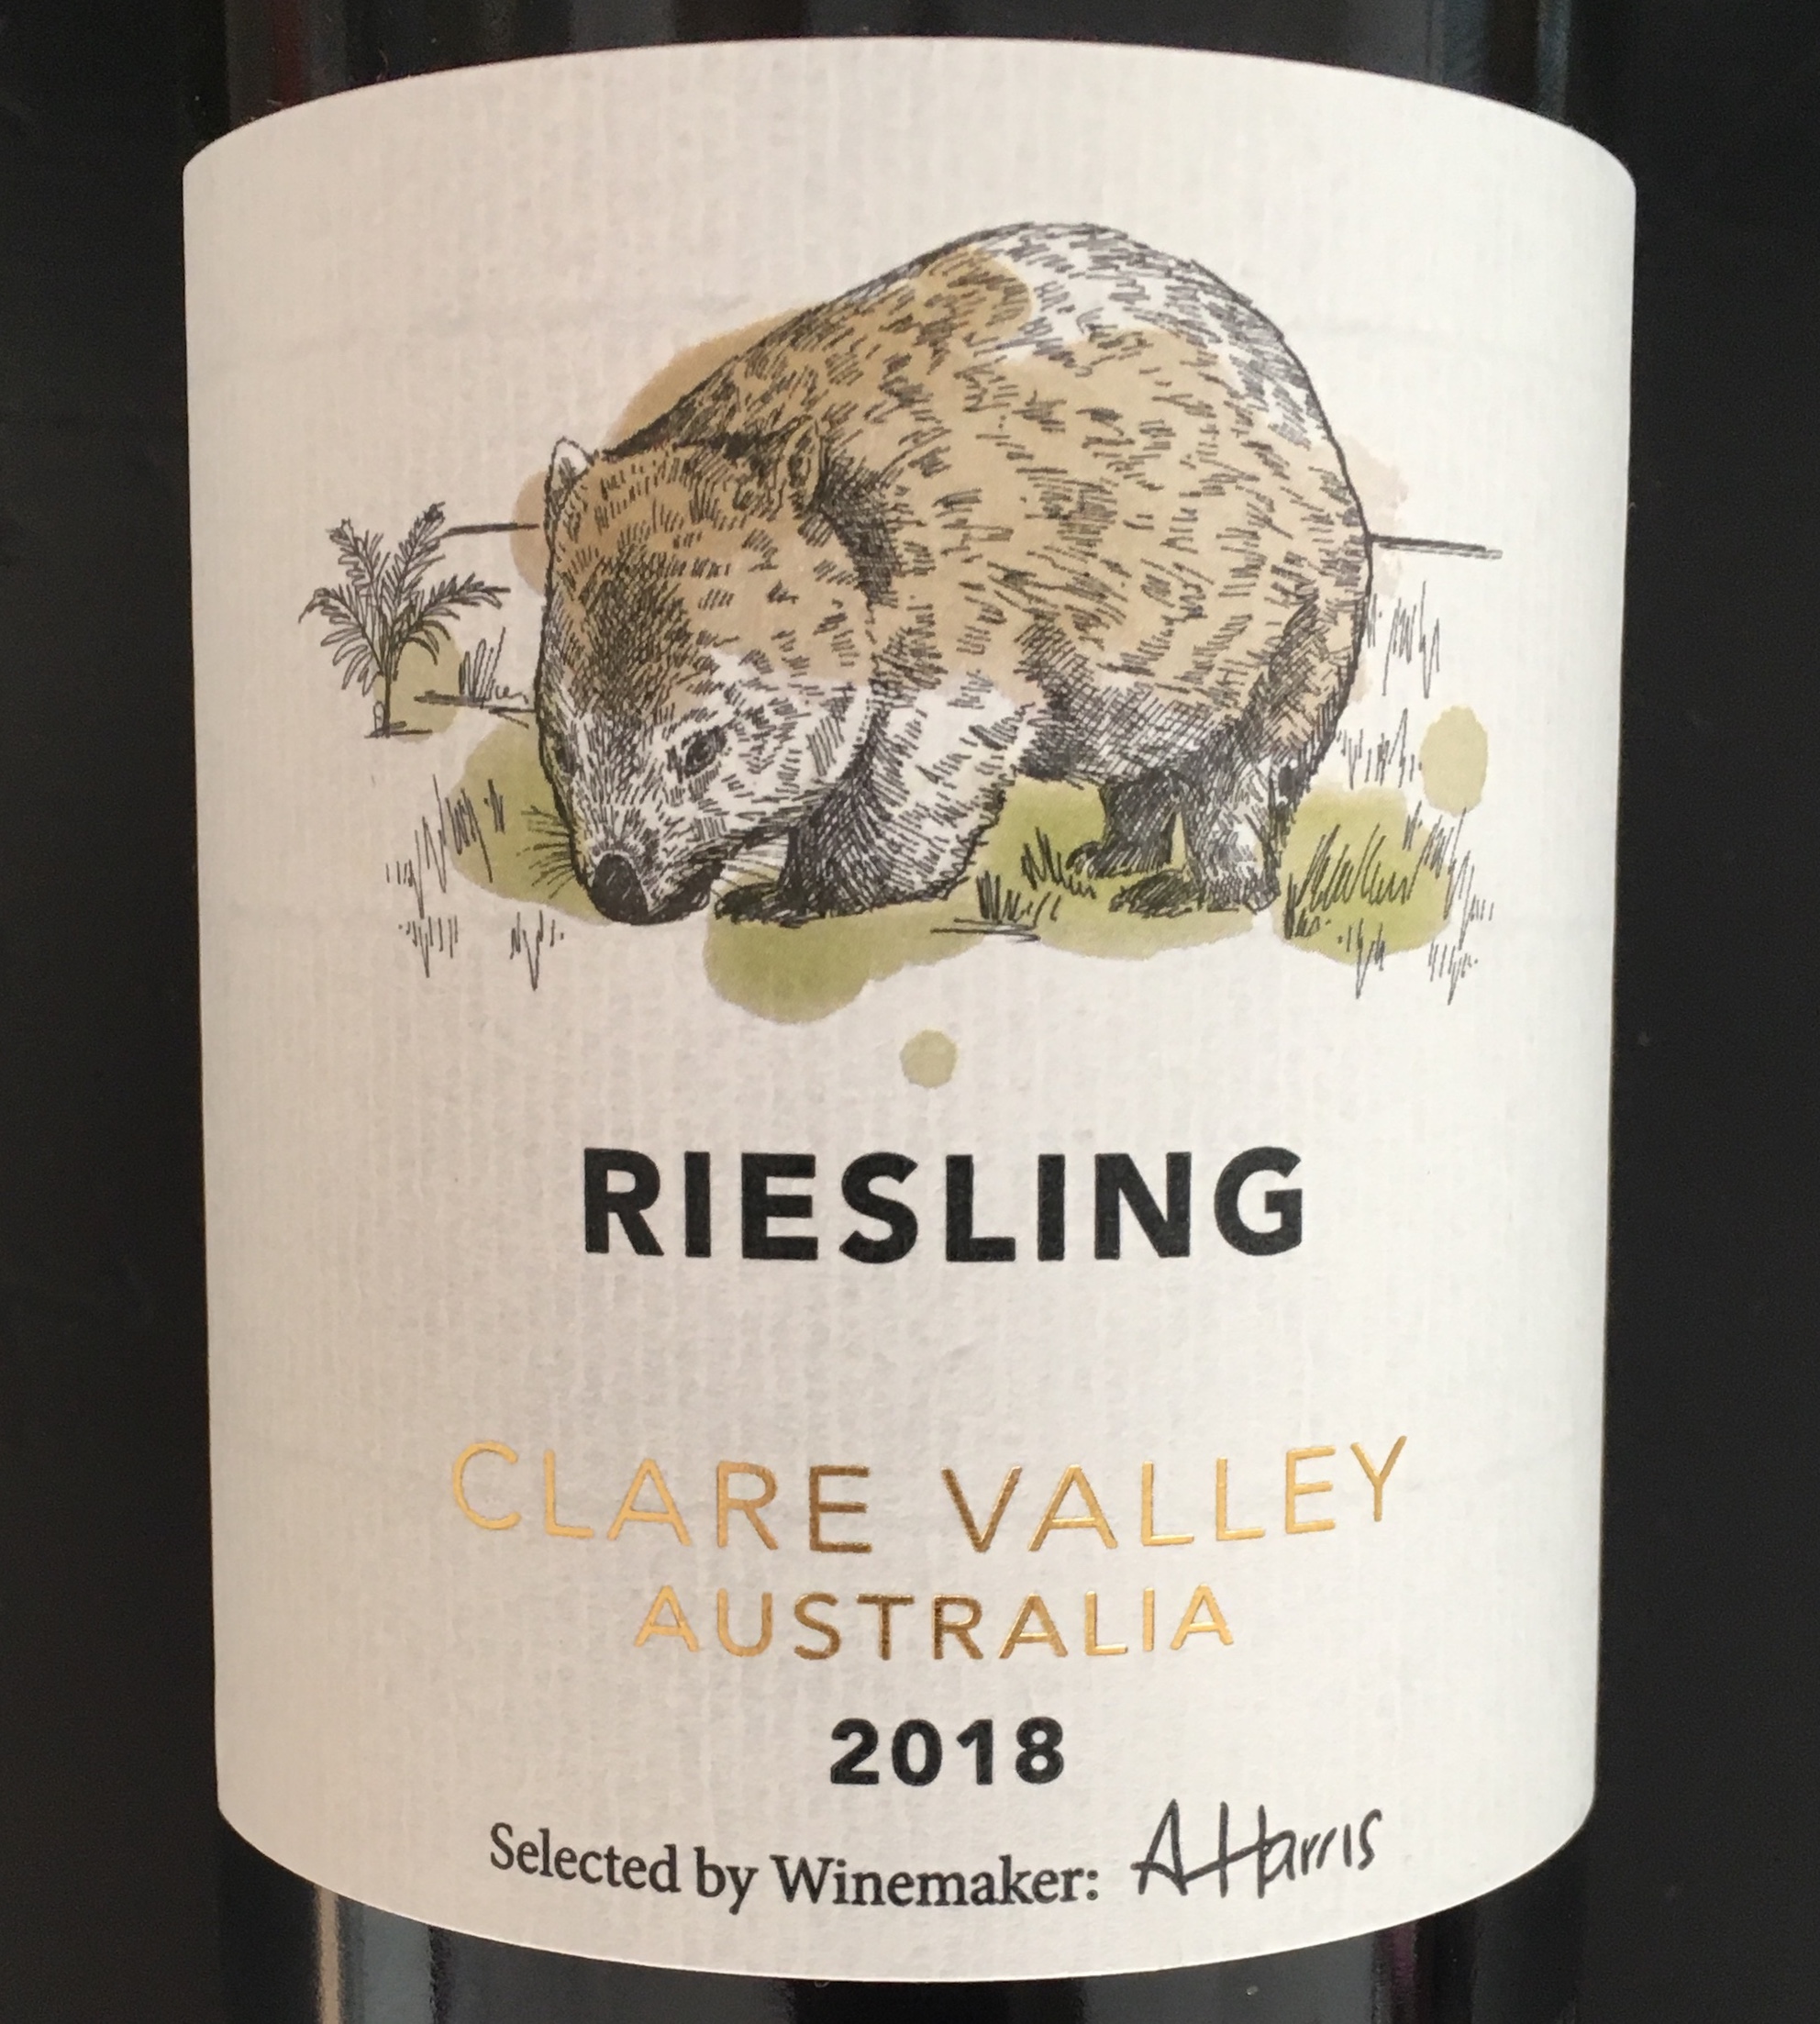 Clare valley riesling